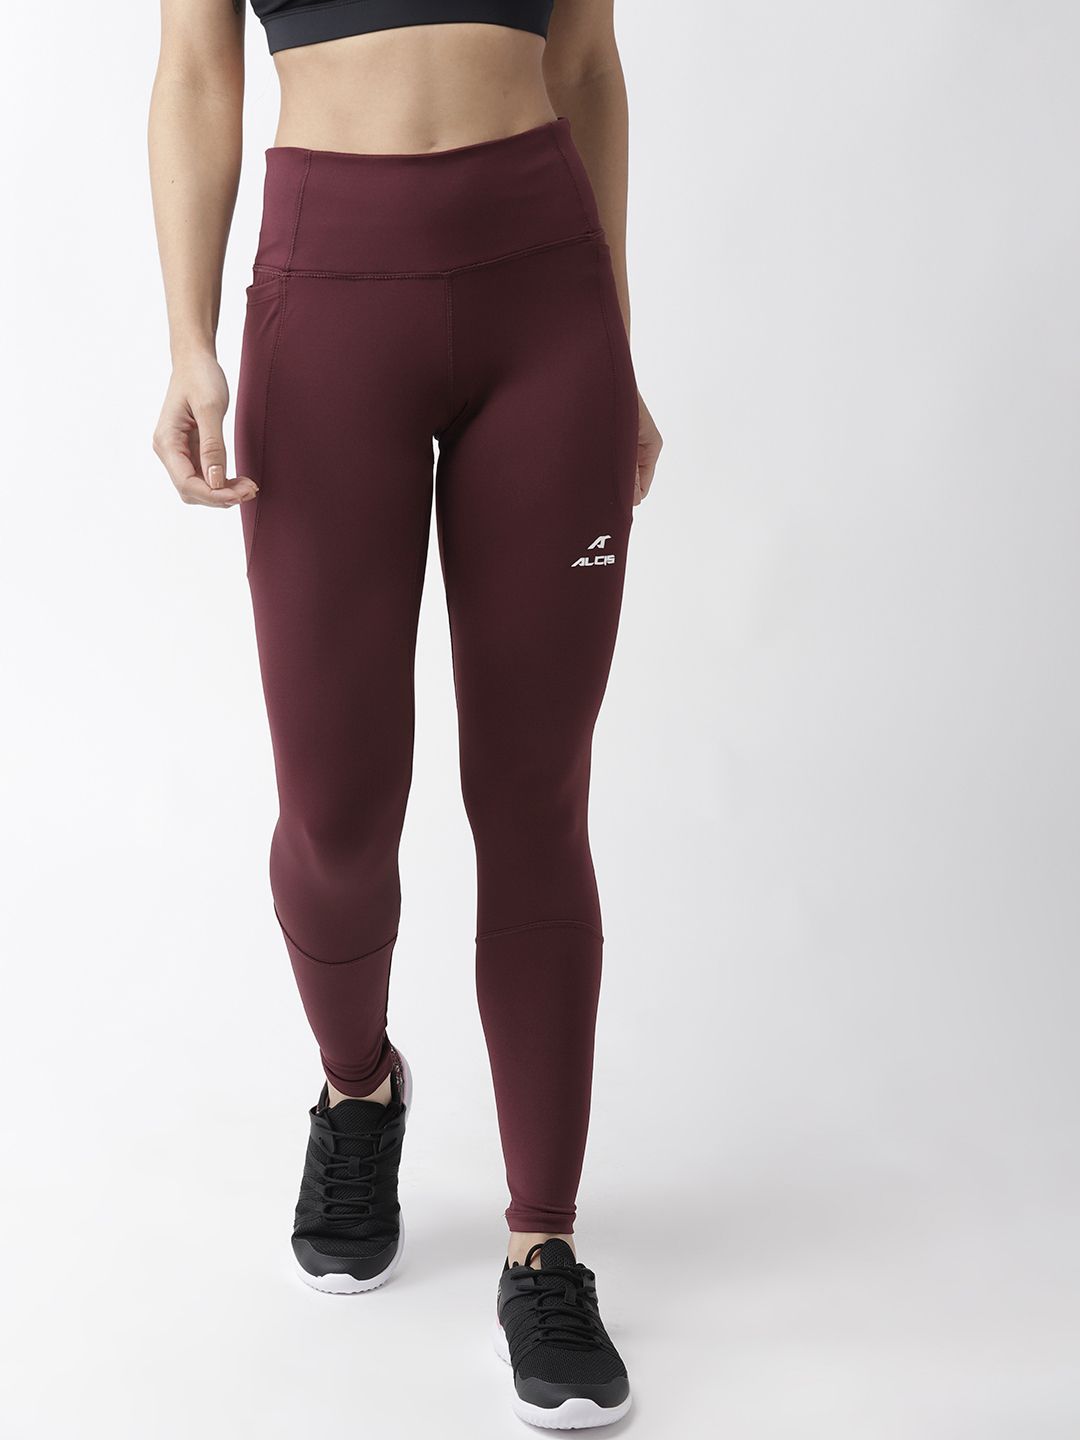 Alcis Women Burgundy Solid Ankle-Length Tights Price in India